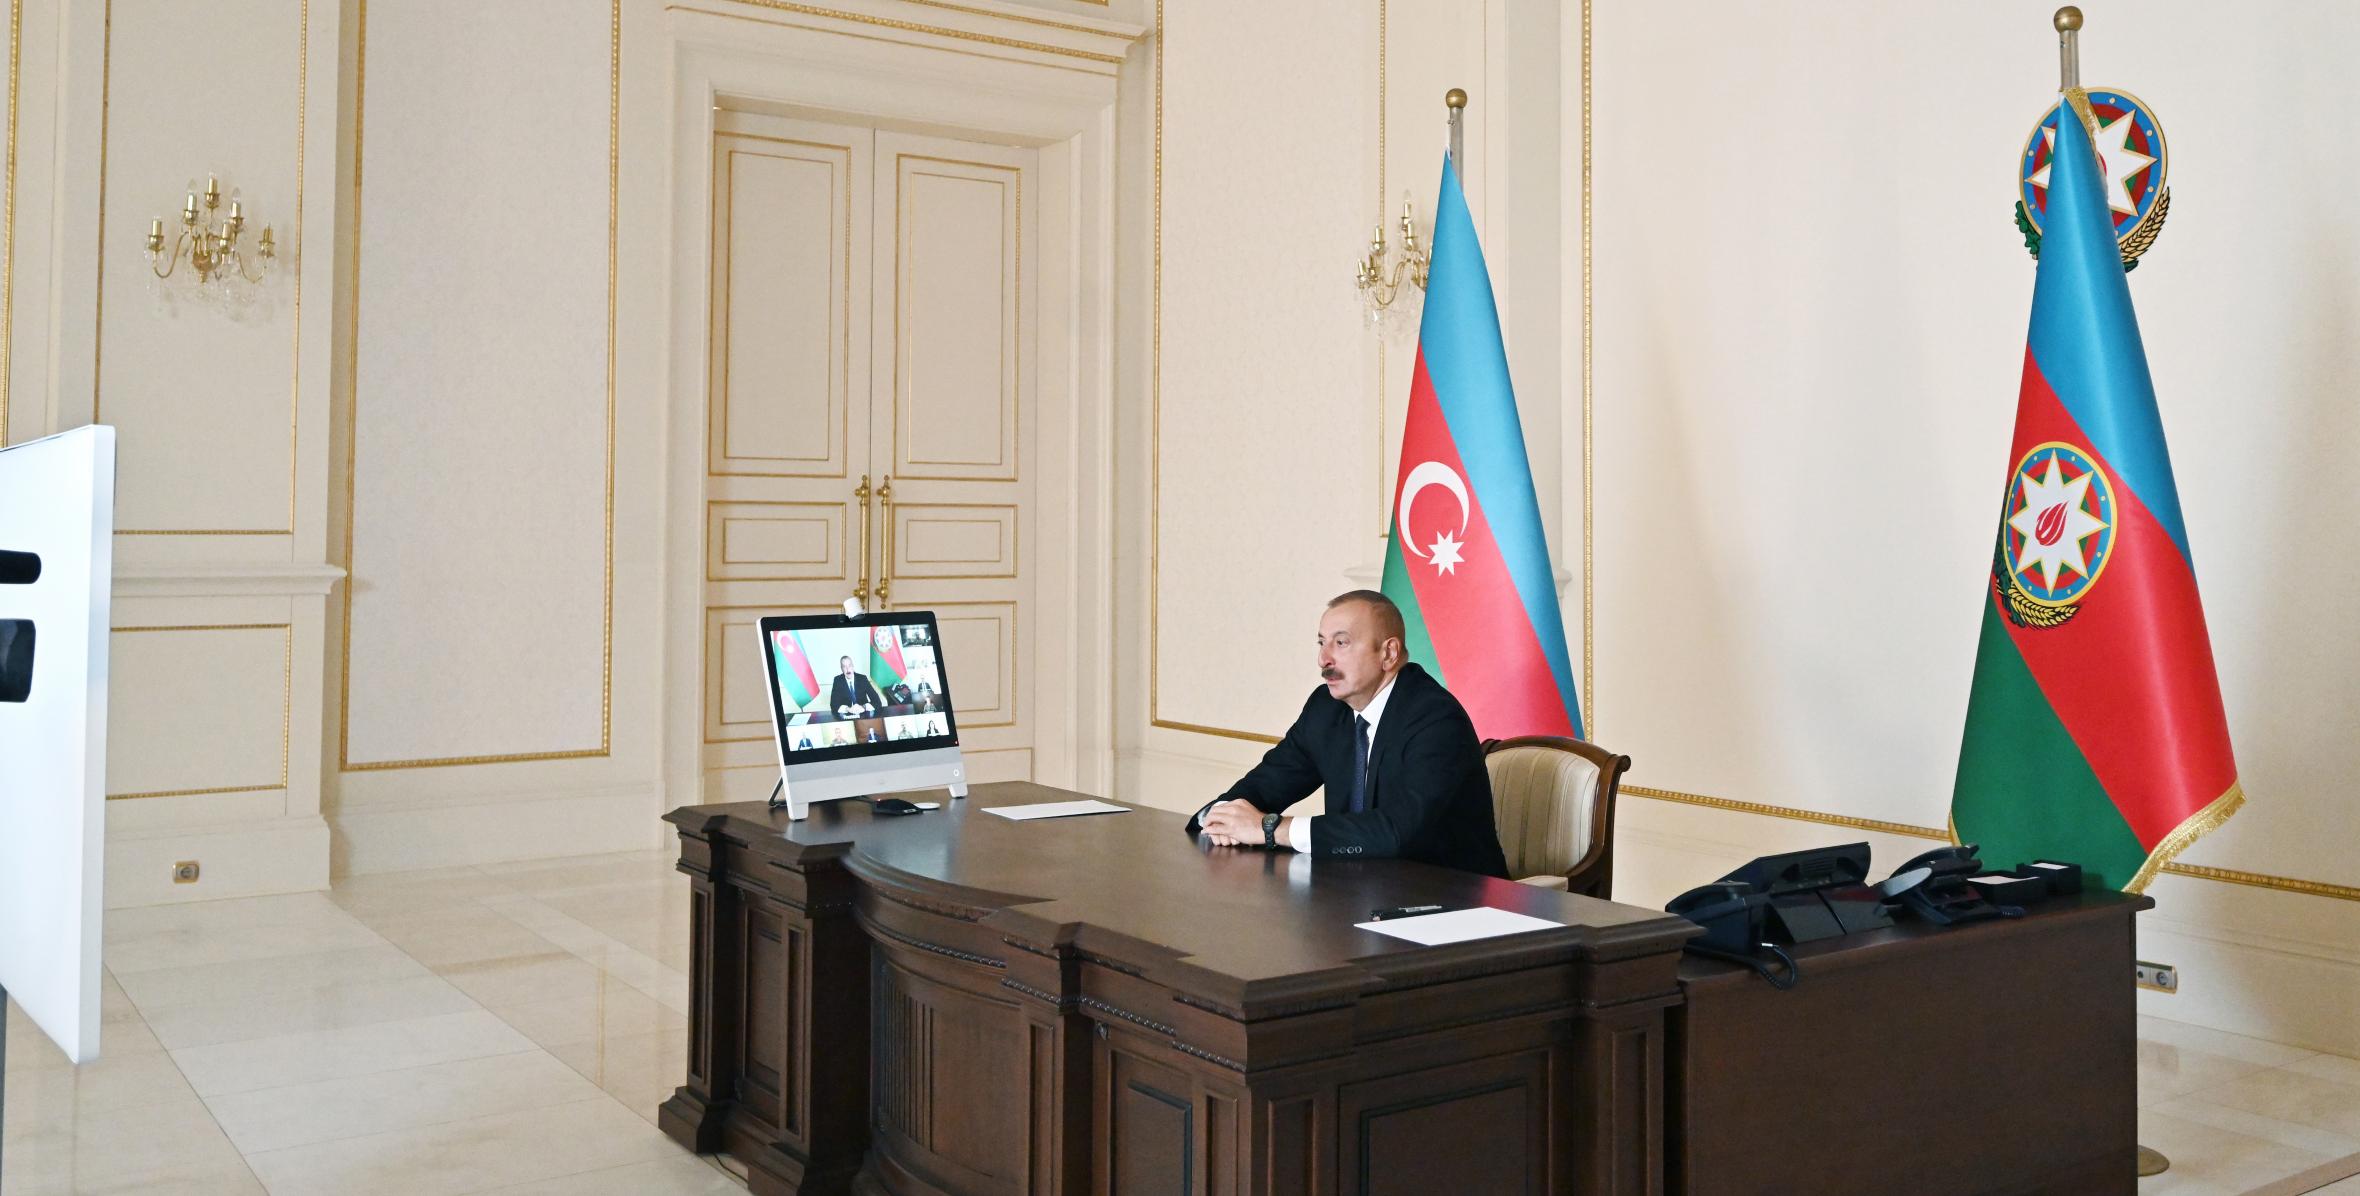 Ilham Aliyev chaired a Security Council meeting